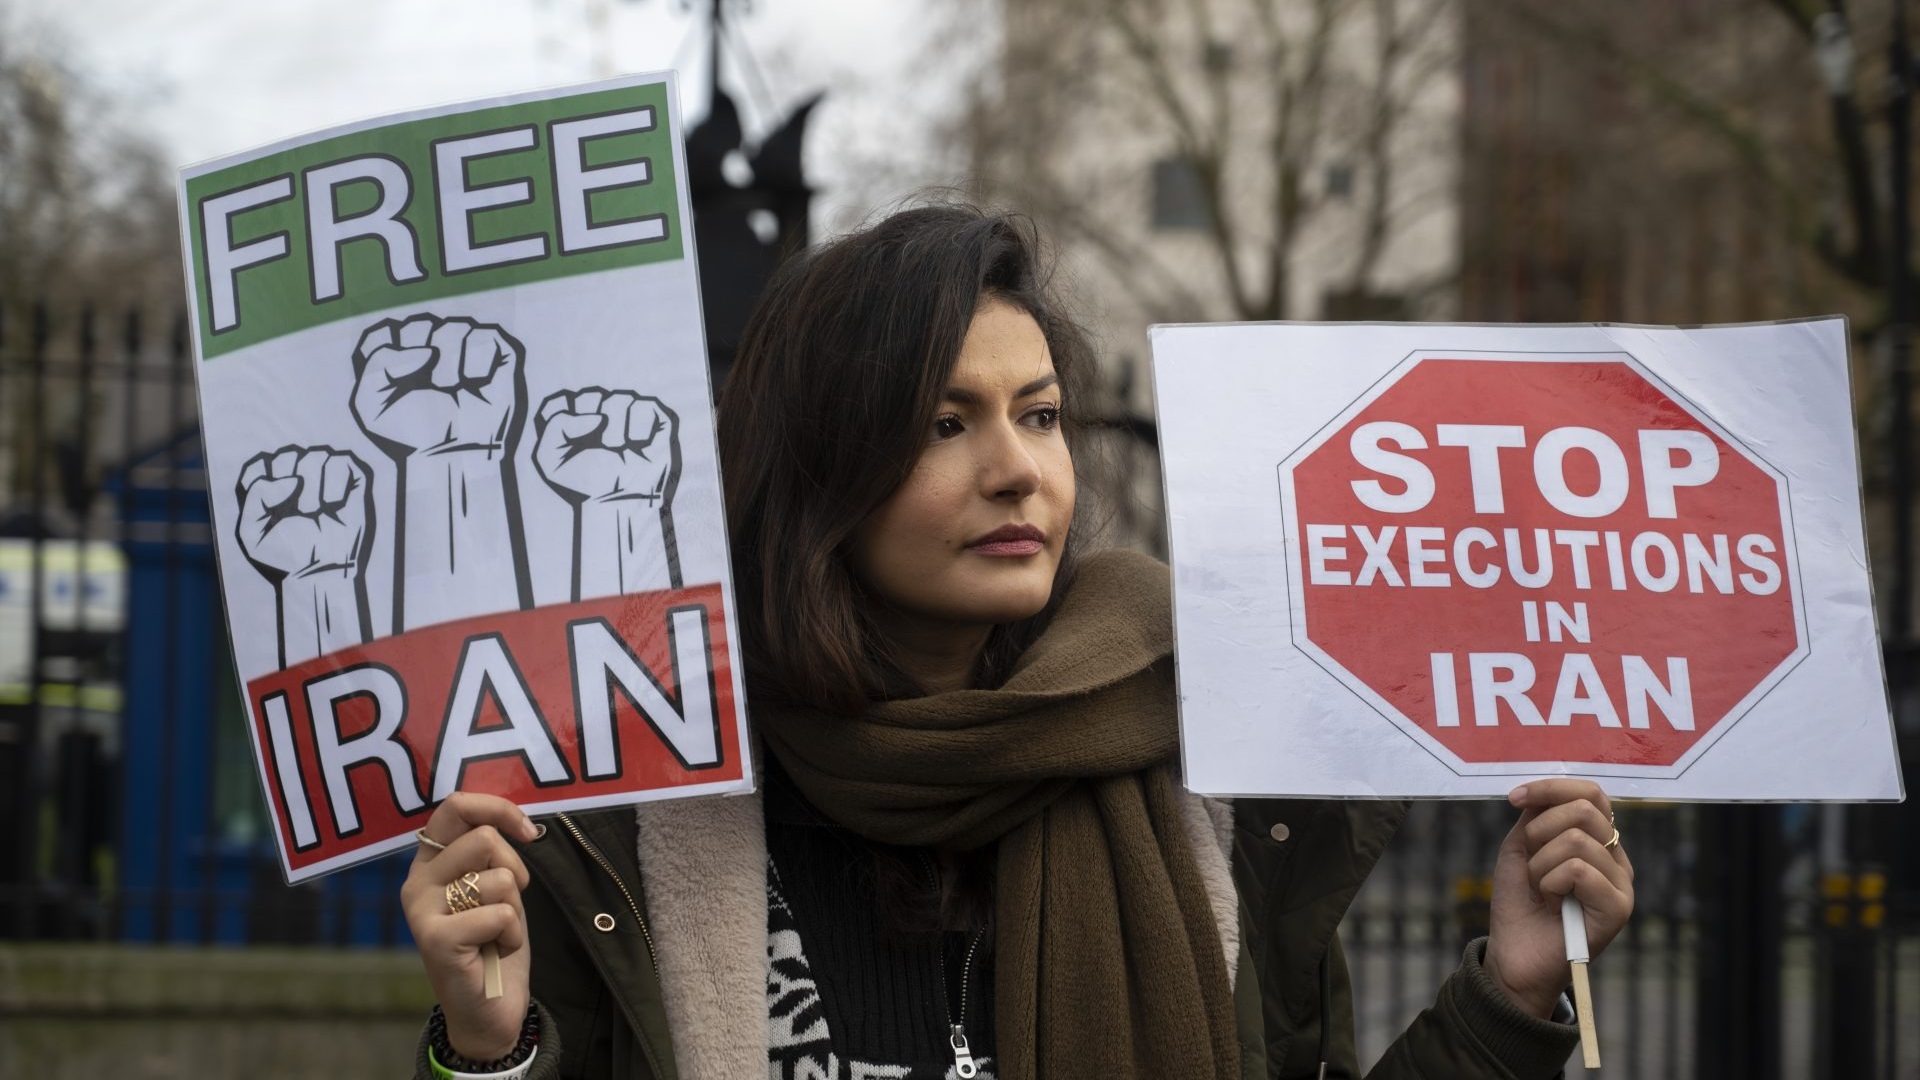 A group of Iranians demonstrate for change in Iran and against execution opposite Downing Street on January 14th 2023 in London, United Kingdom.. Photo: Jenny Matthews/In Pictures via Getty Images